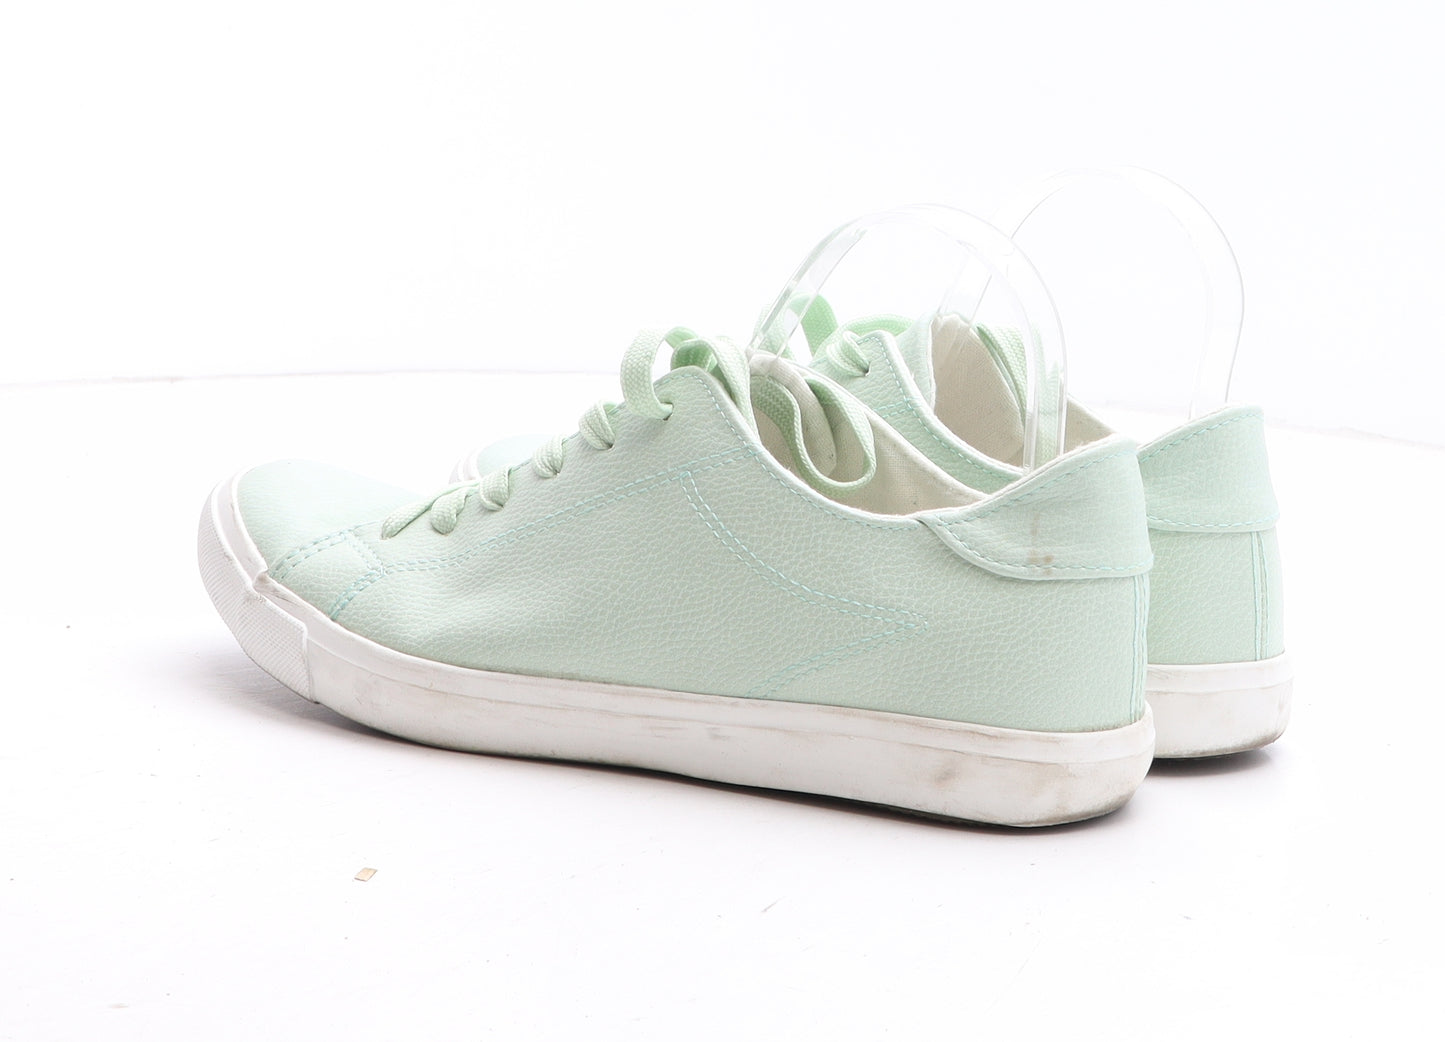 New Look Womens Green Synthetic Trainer UK